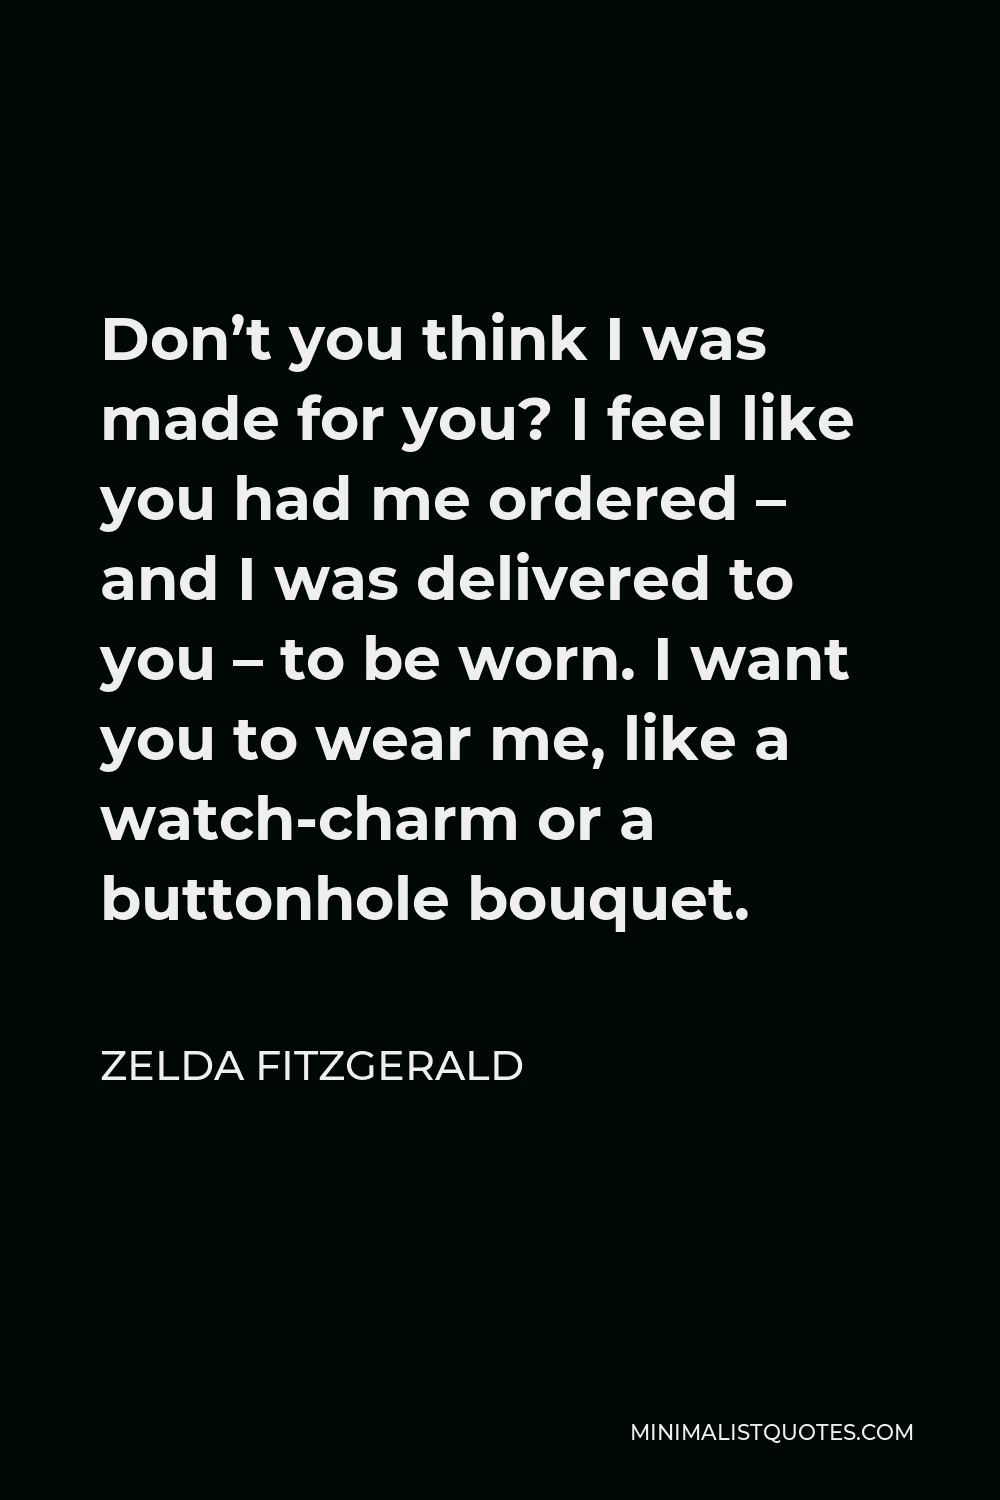 Zelda Fitzgerald Quote - Don’t you think I was made for you? I feel like you had me ordered – and I was delivered to you – to be worn. I want you to wear me, like a watch-charm or a buttonhole bouquet.